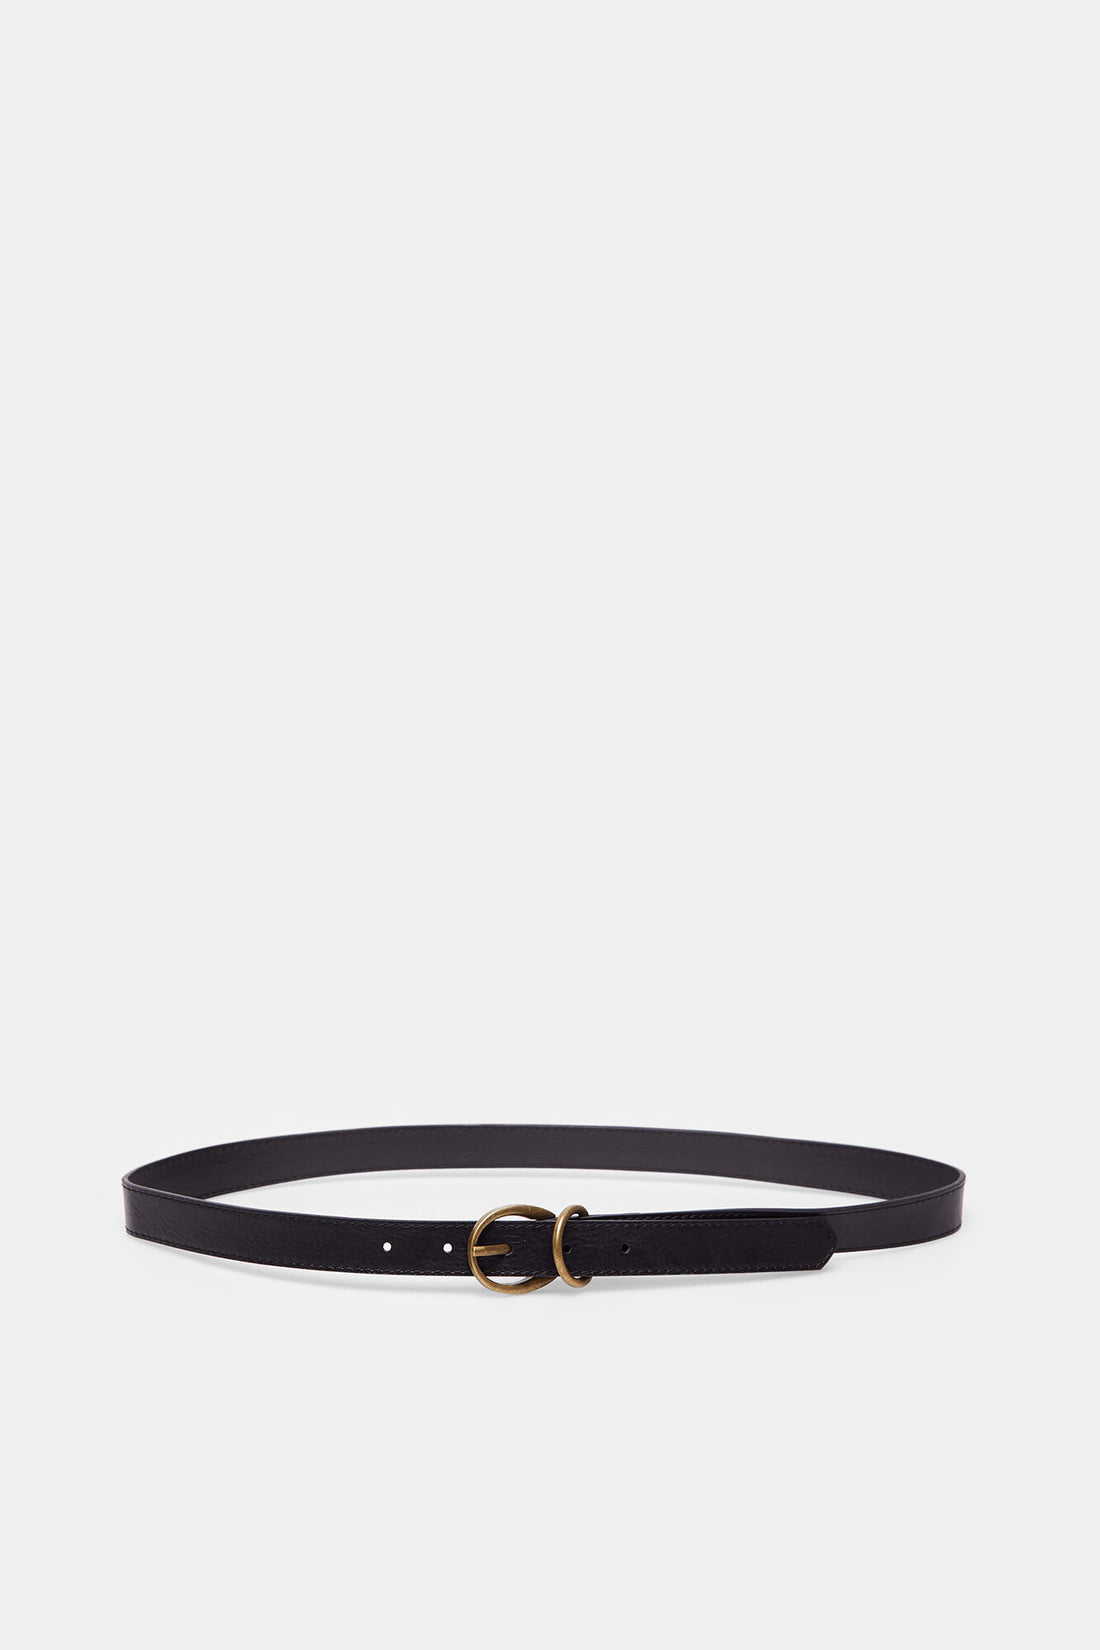 Thin Belt With Gold Buckle_8467060_01_01